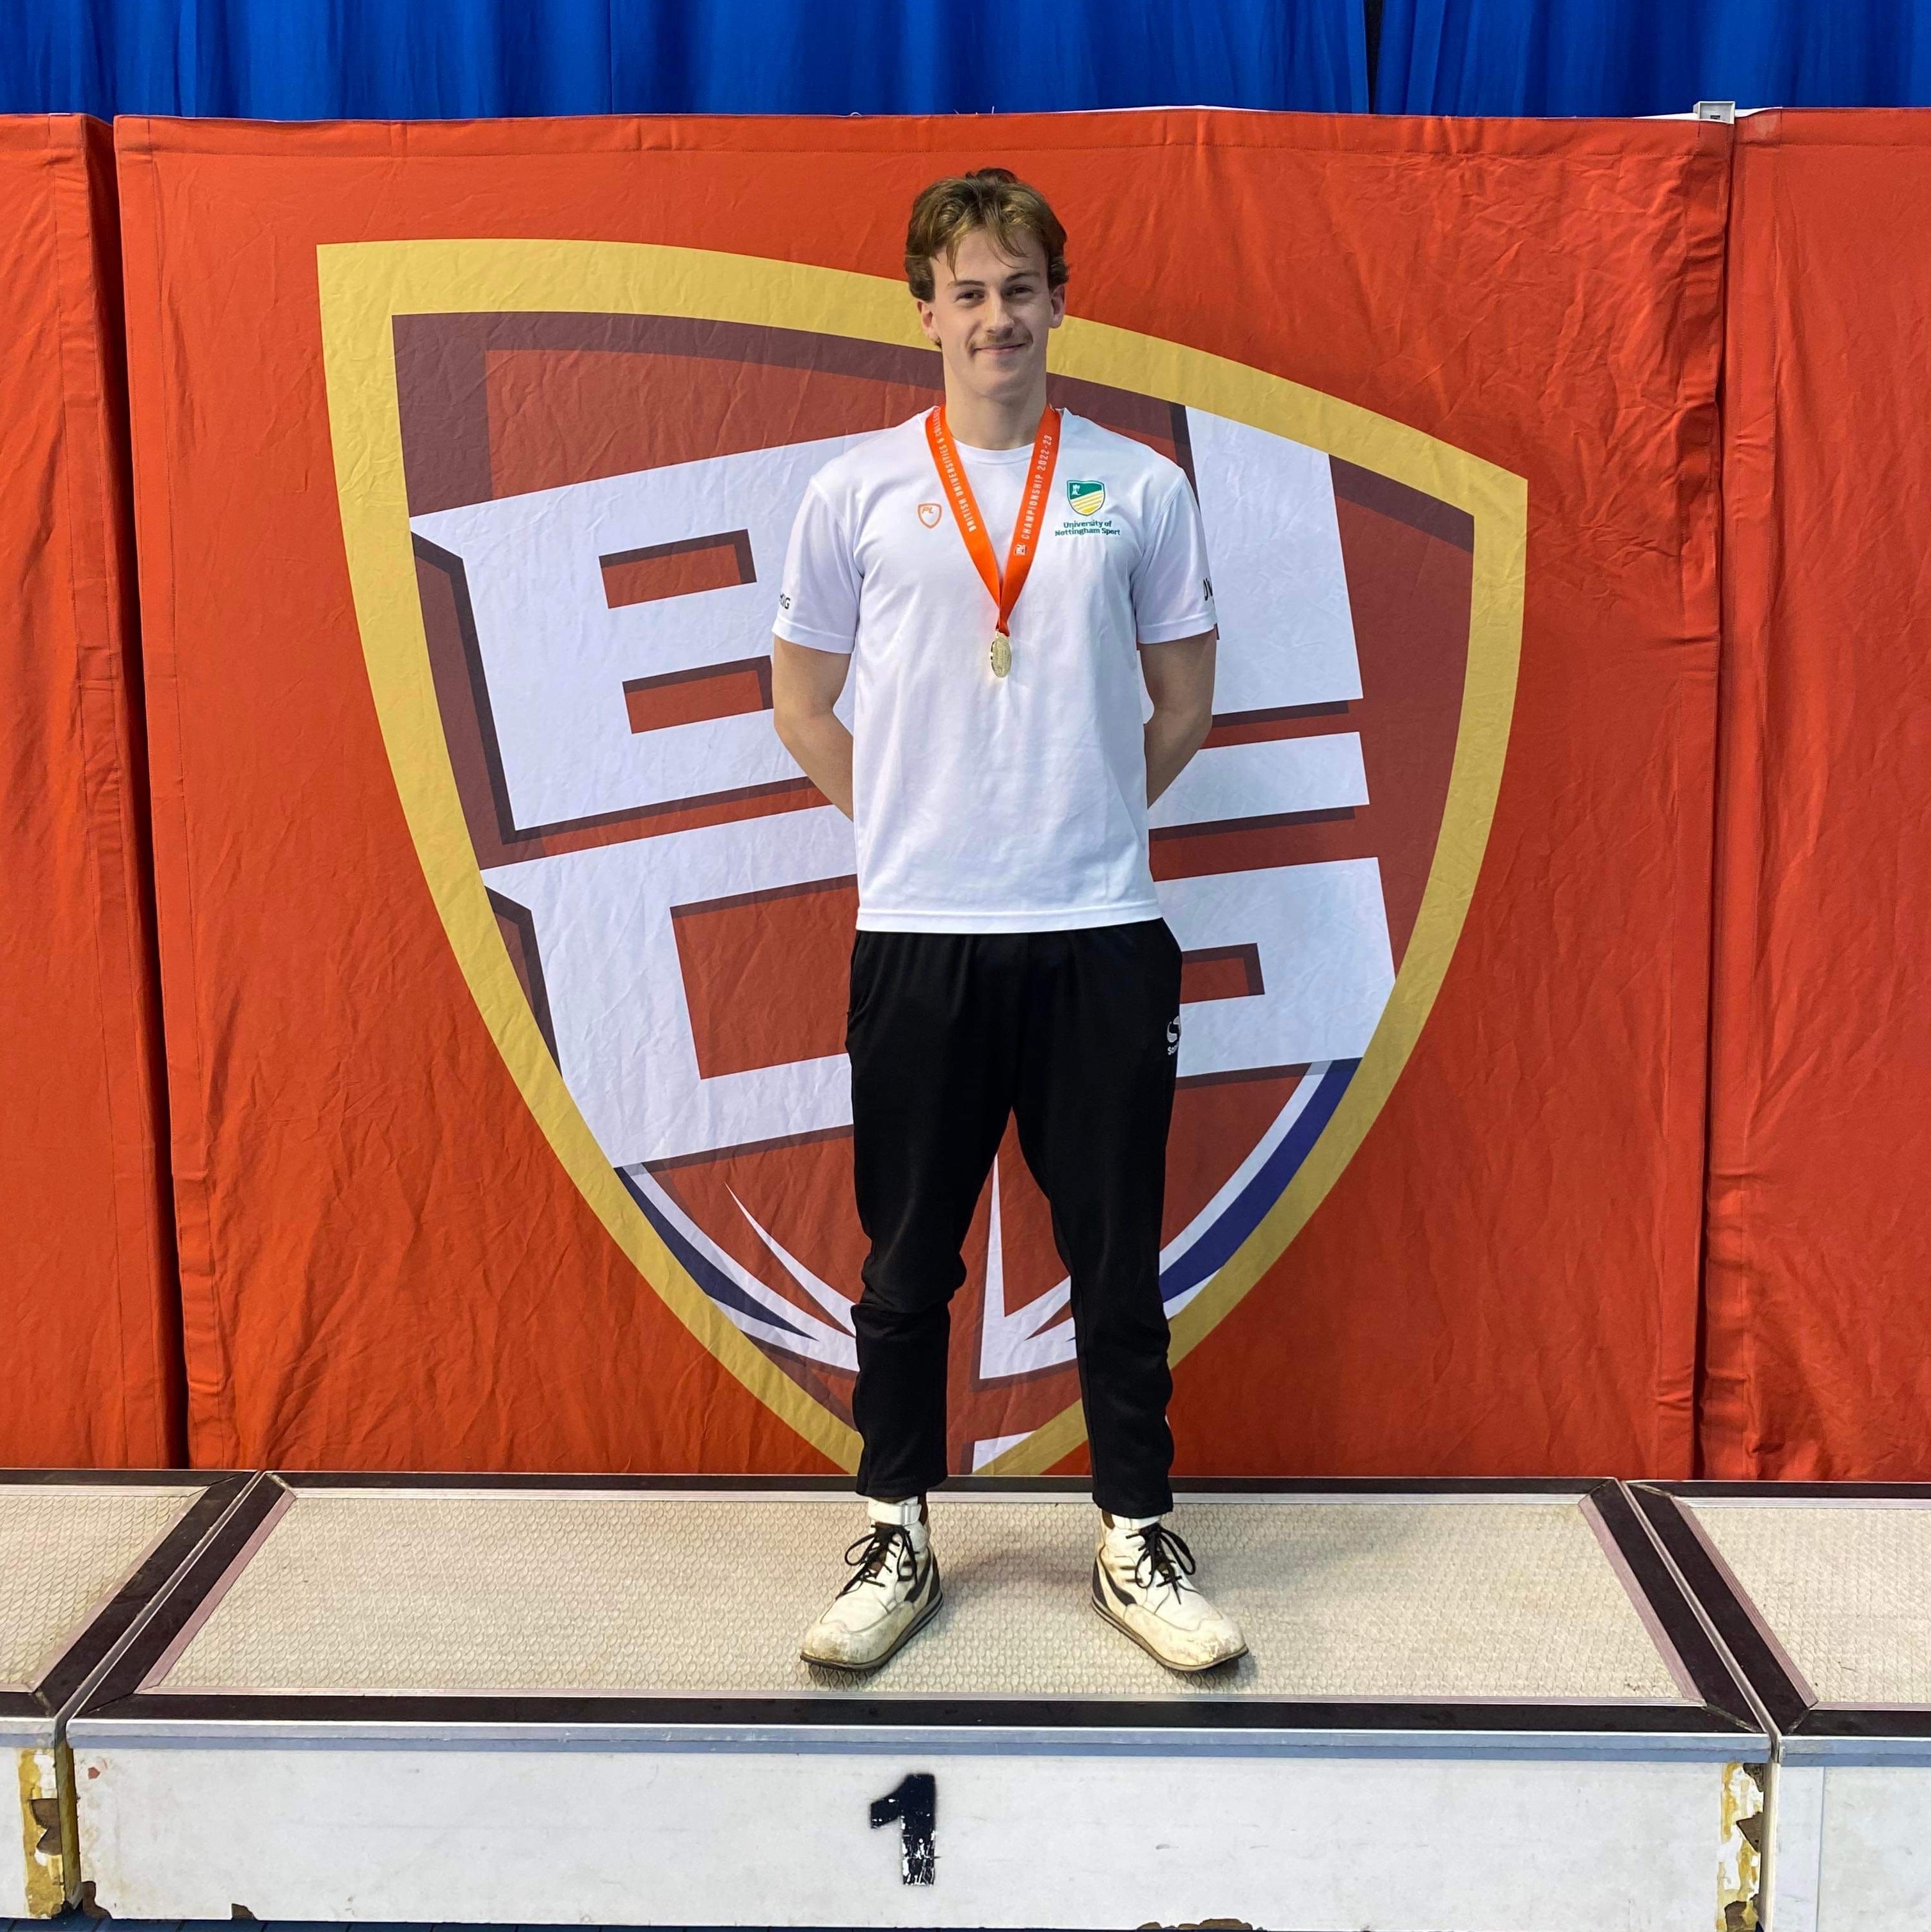 Owen stands on a swimmers' winners podium